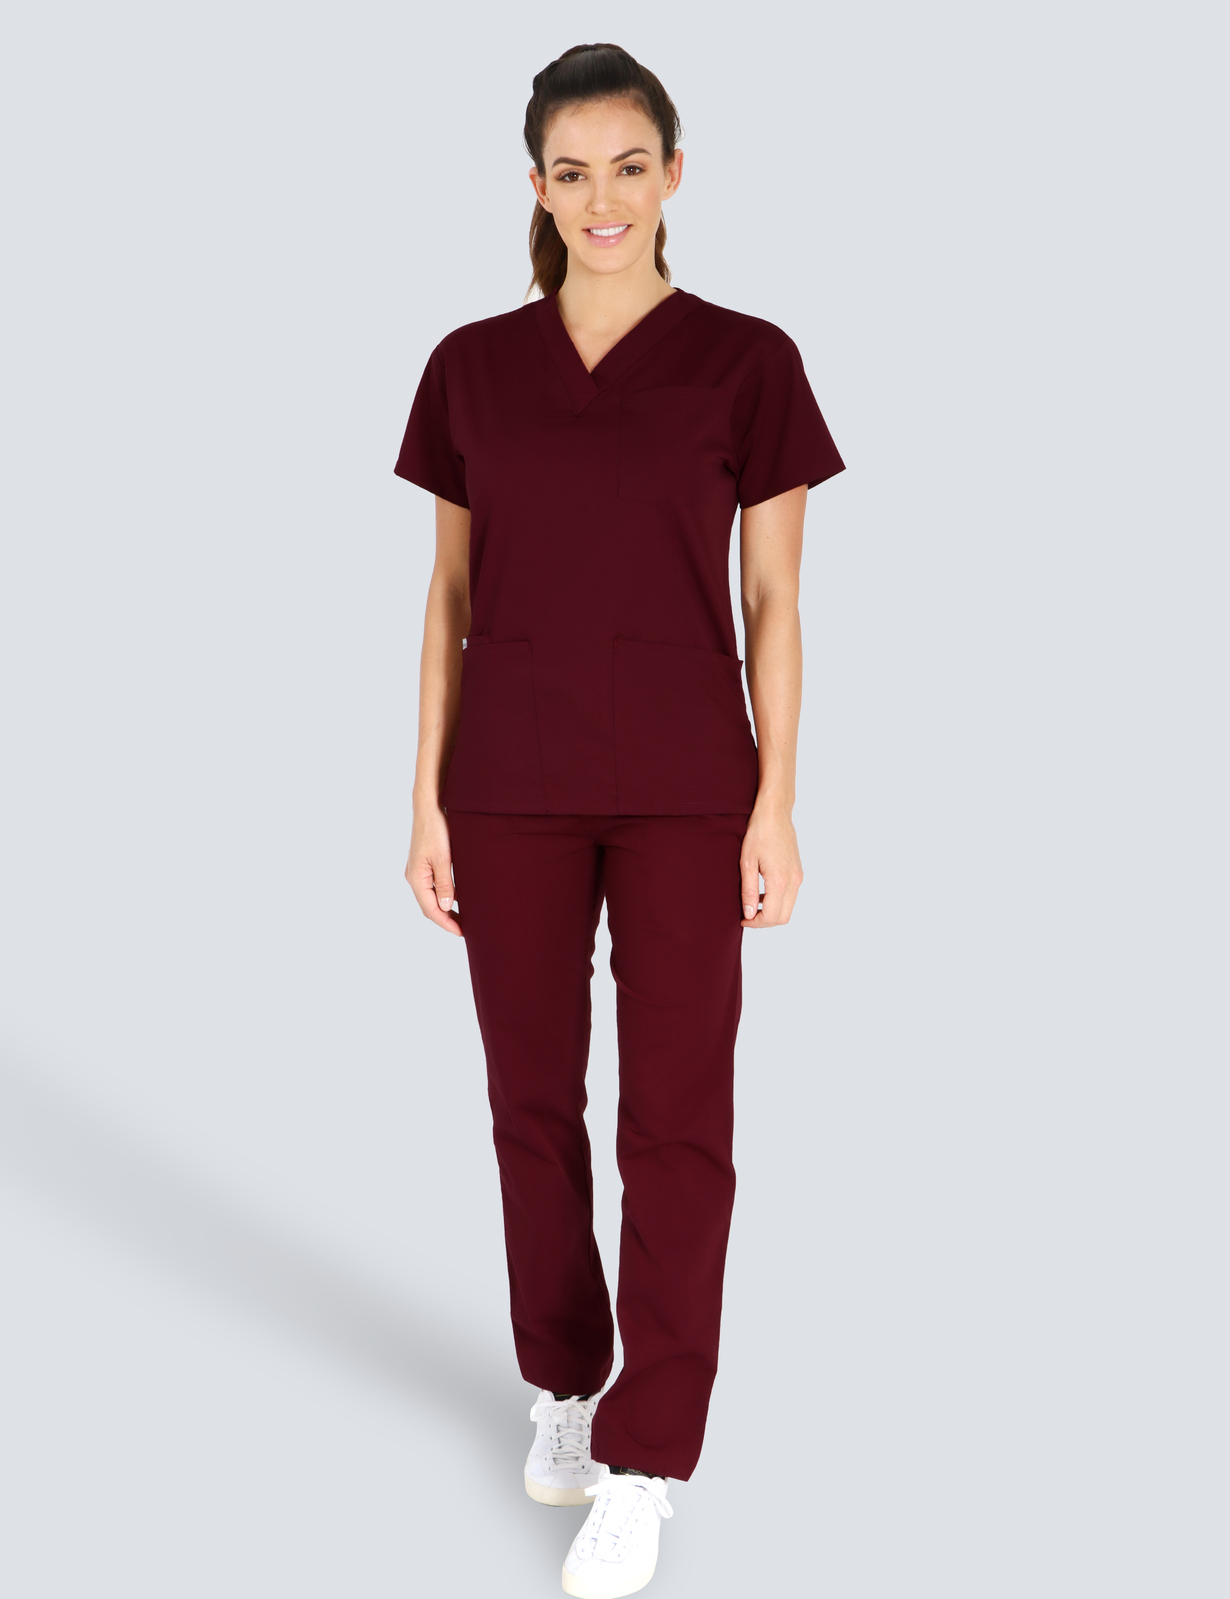 Redcliffe Hospital - ED AIN (4 Pocket Scrub Top and Cargo Pants in Burgundy incl Logos)